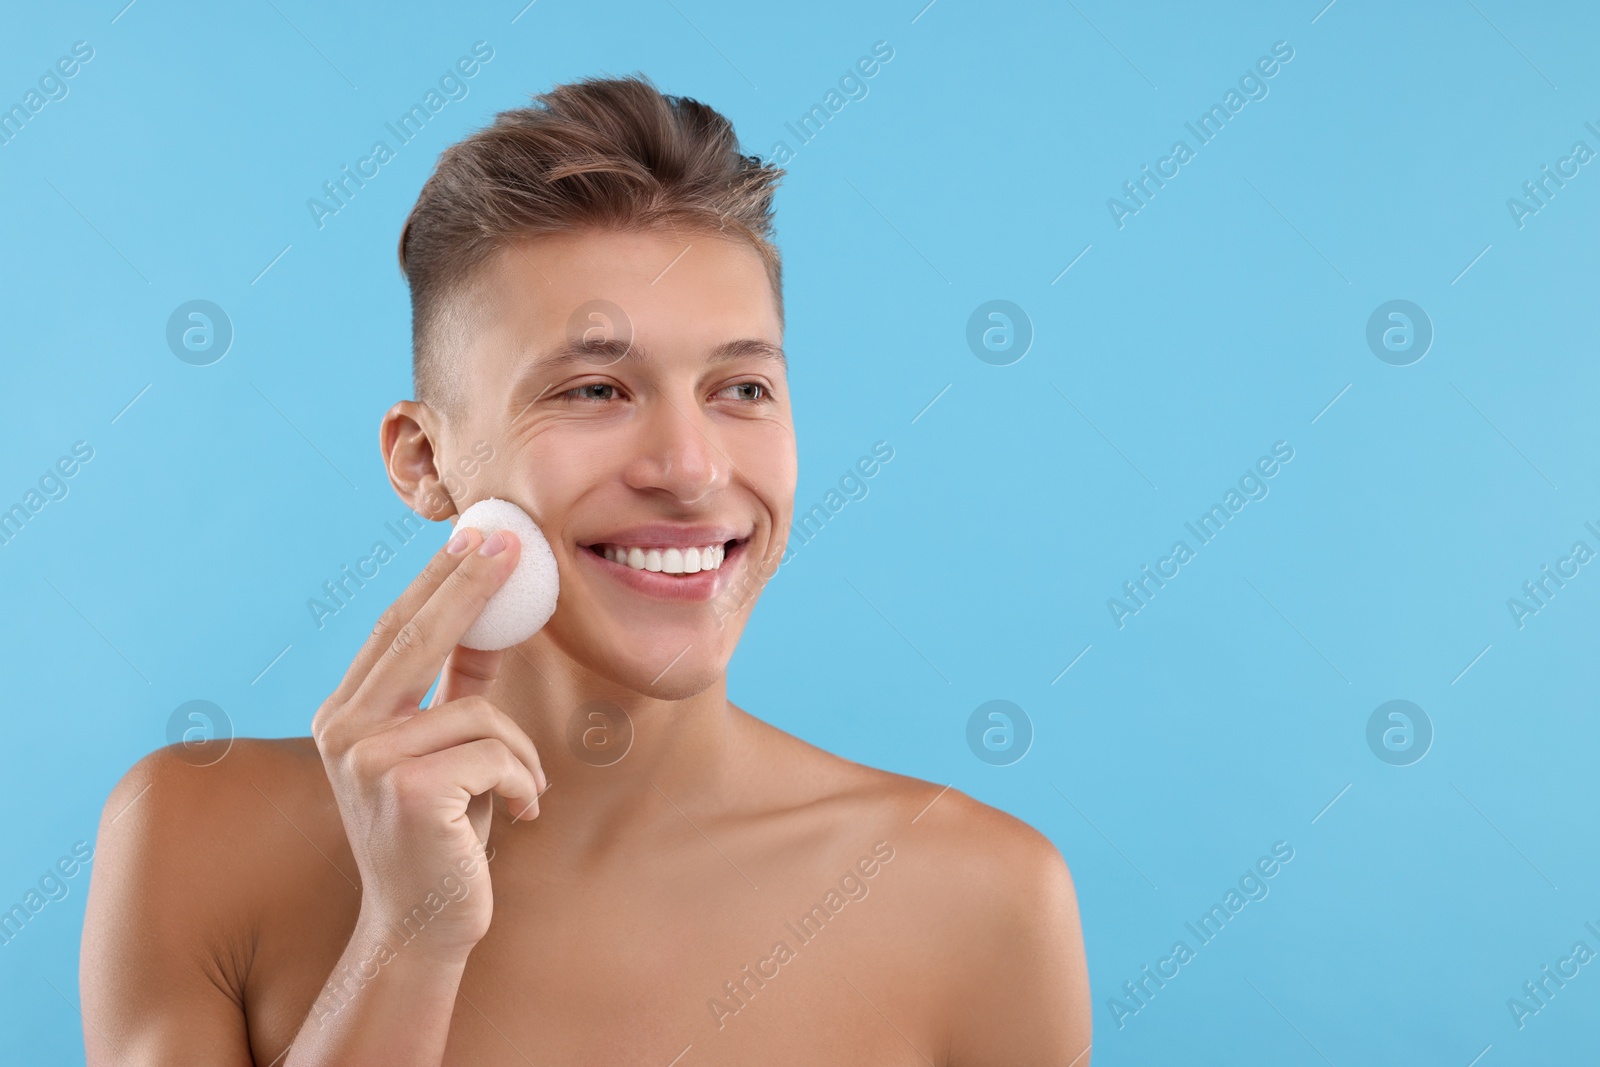 Photo of Happy young man washing his face with sponge on light blue background. Space for text